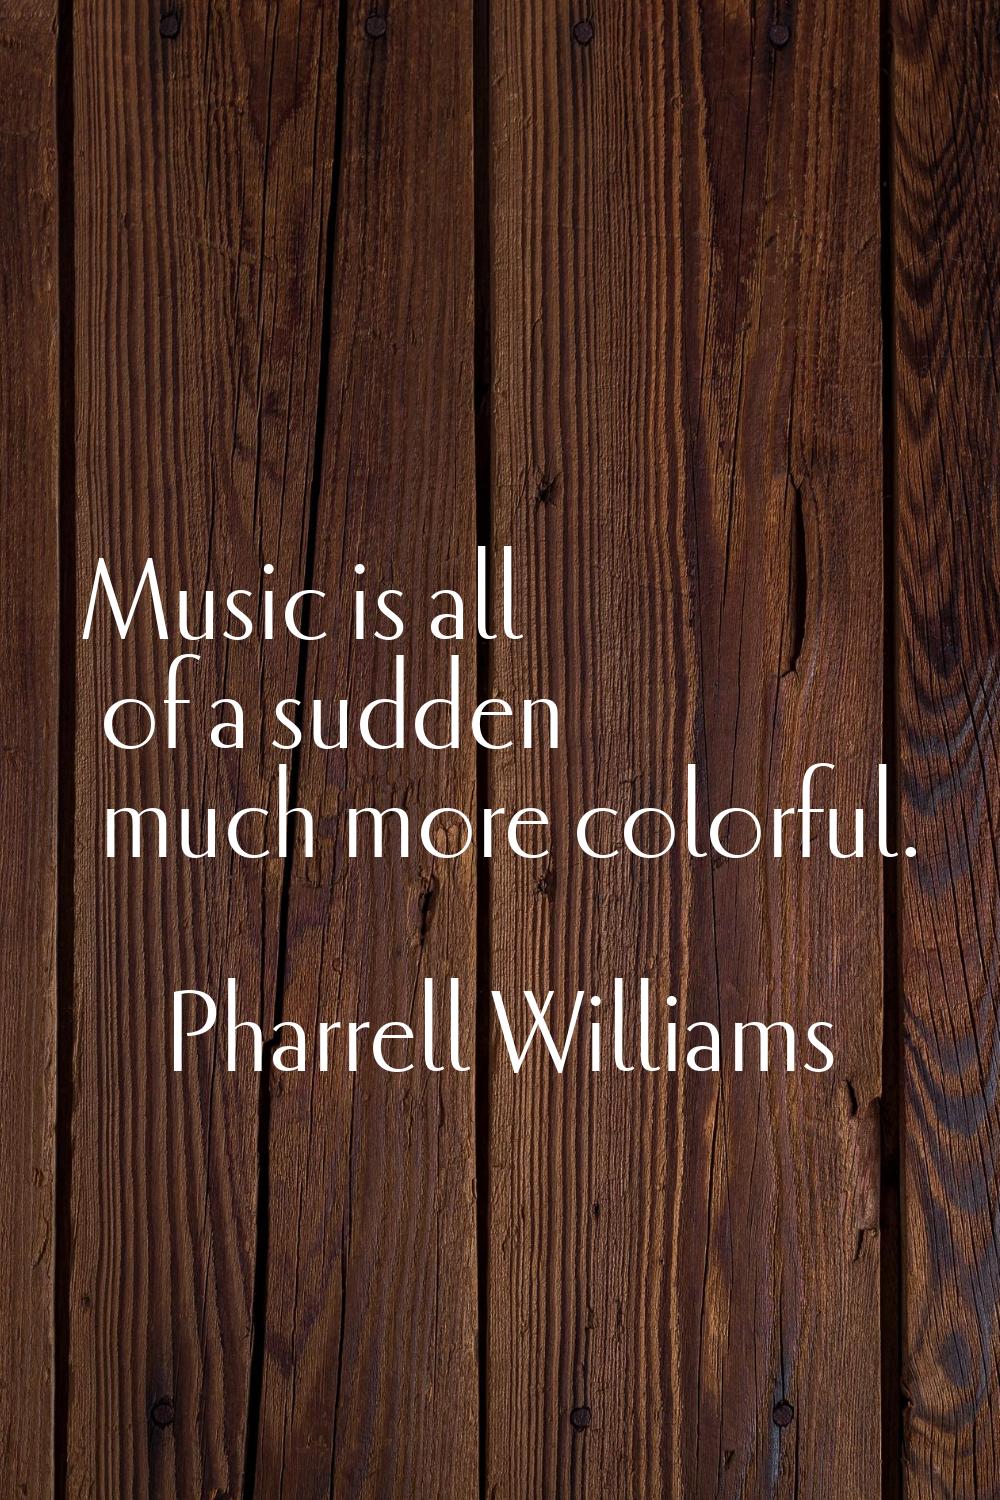 Music is all of a sudden much more colorful.